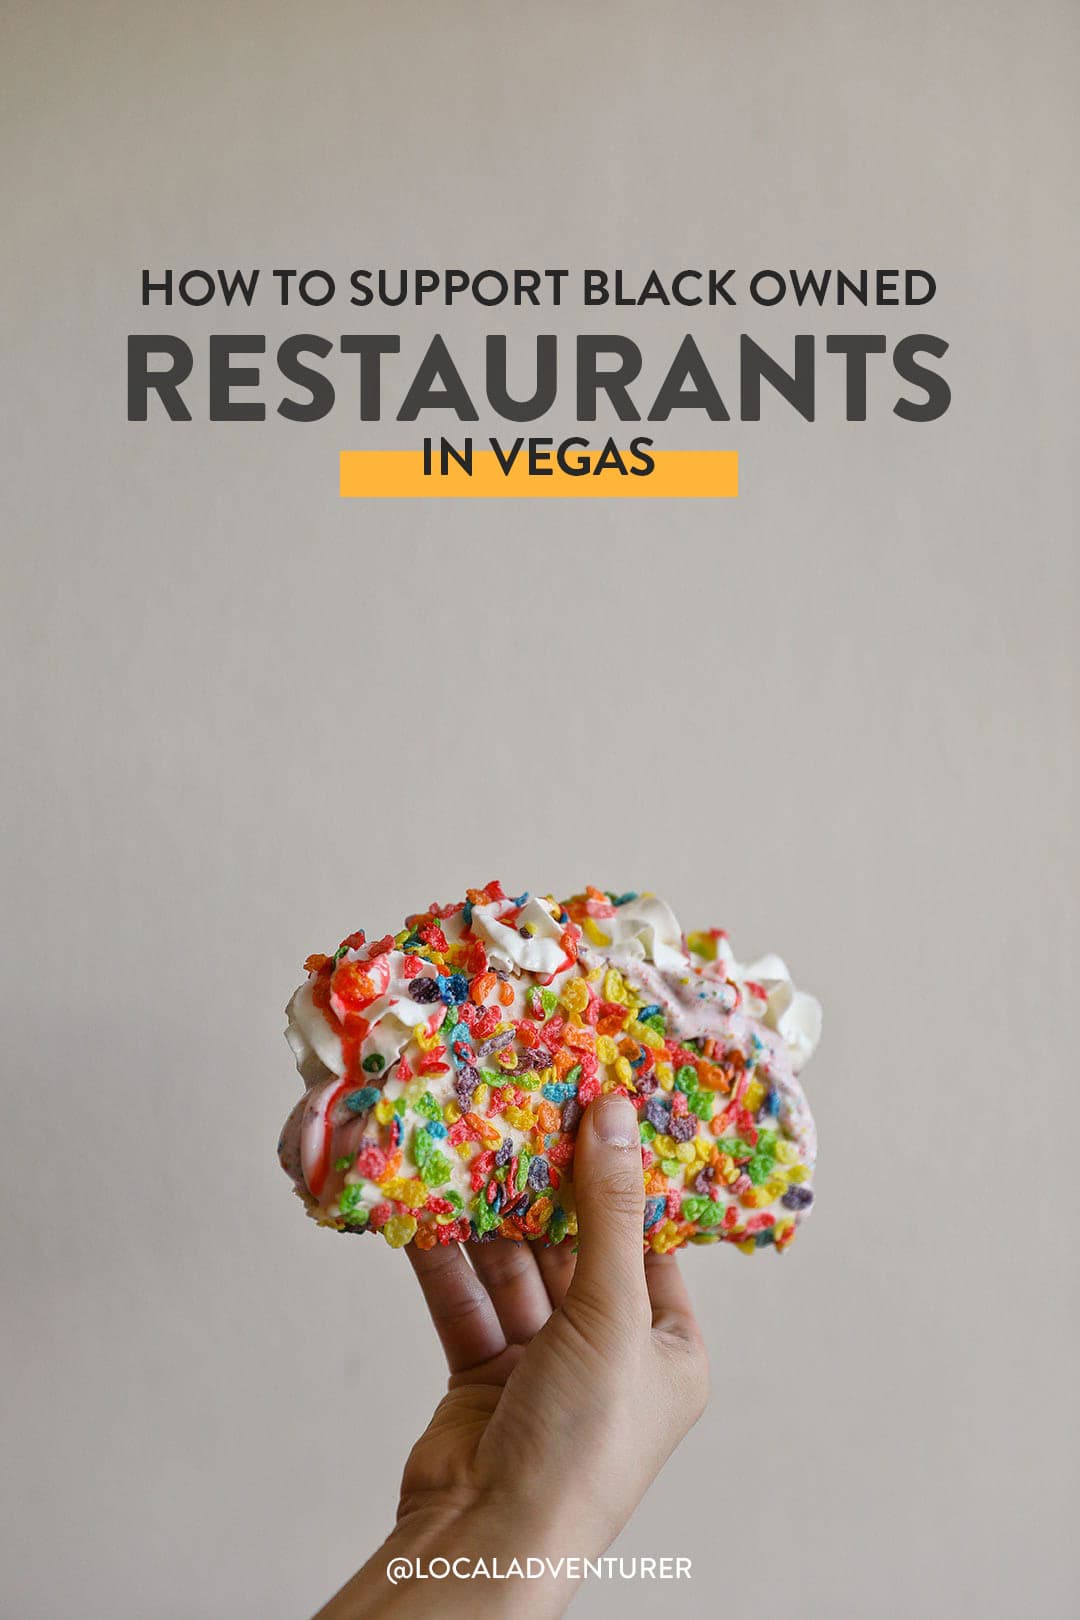 How to Support Black Owned Restaurants in Las Vegas